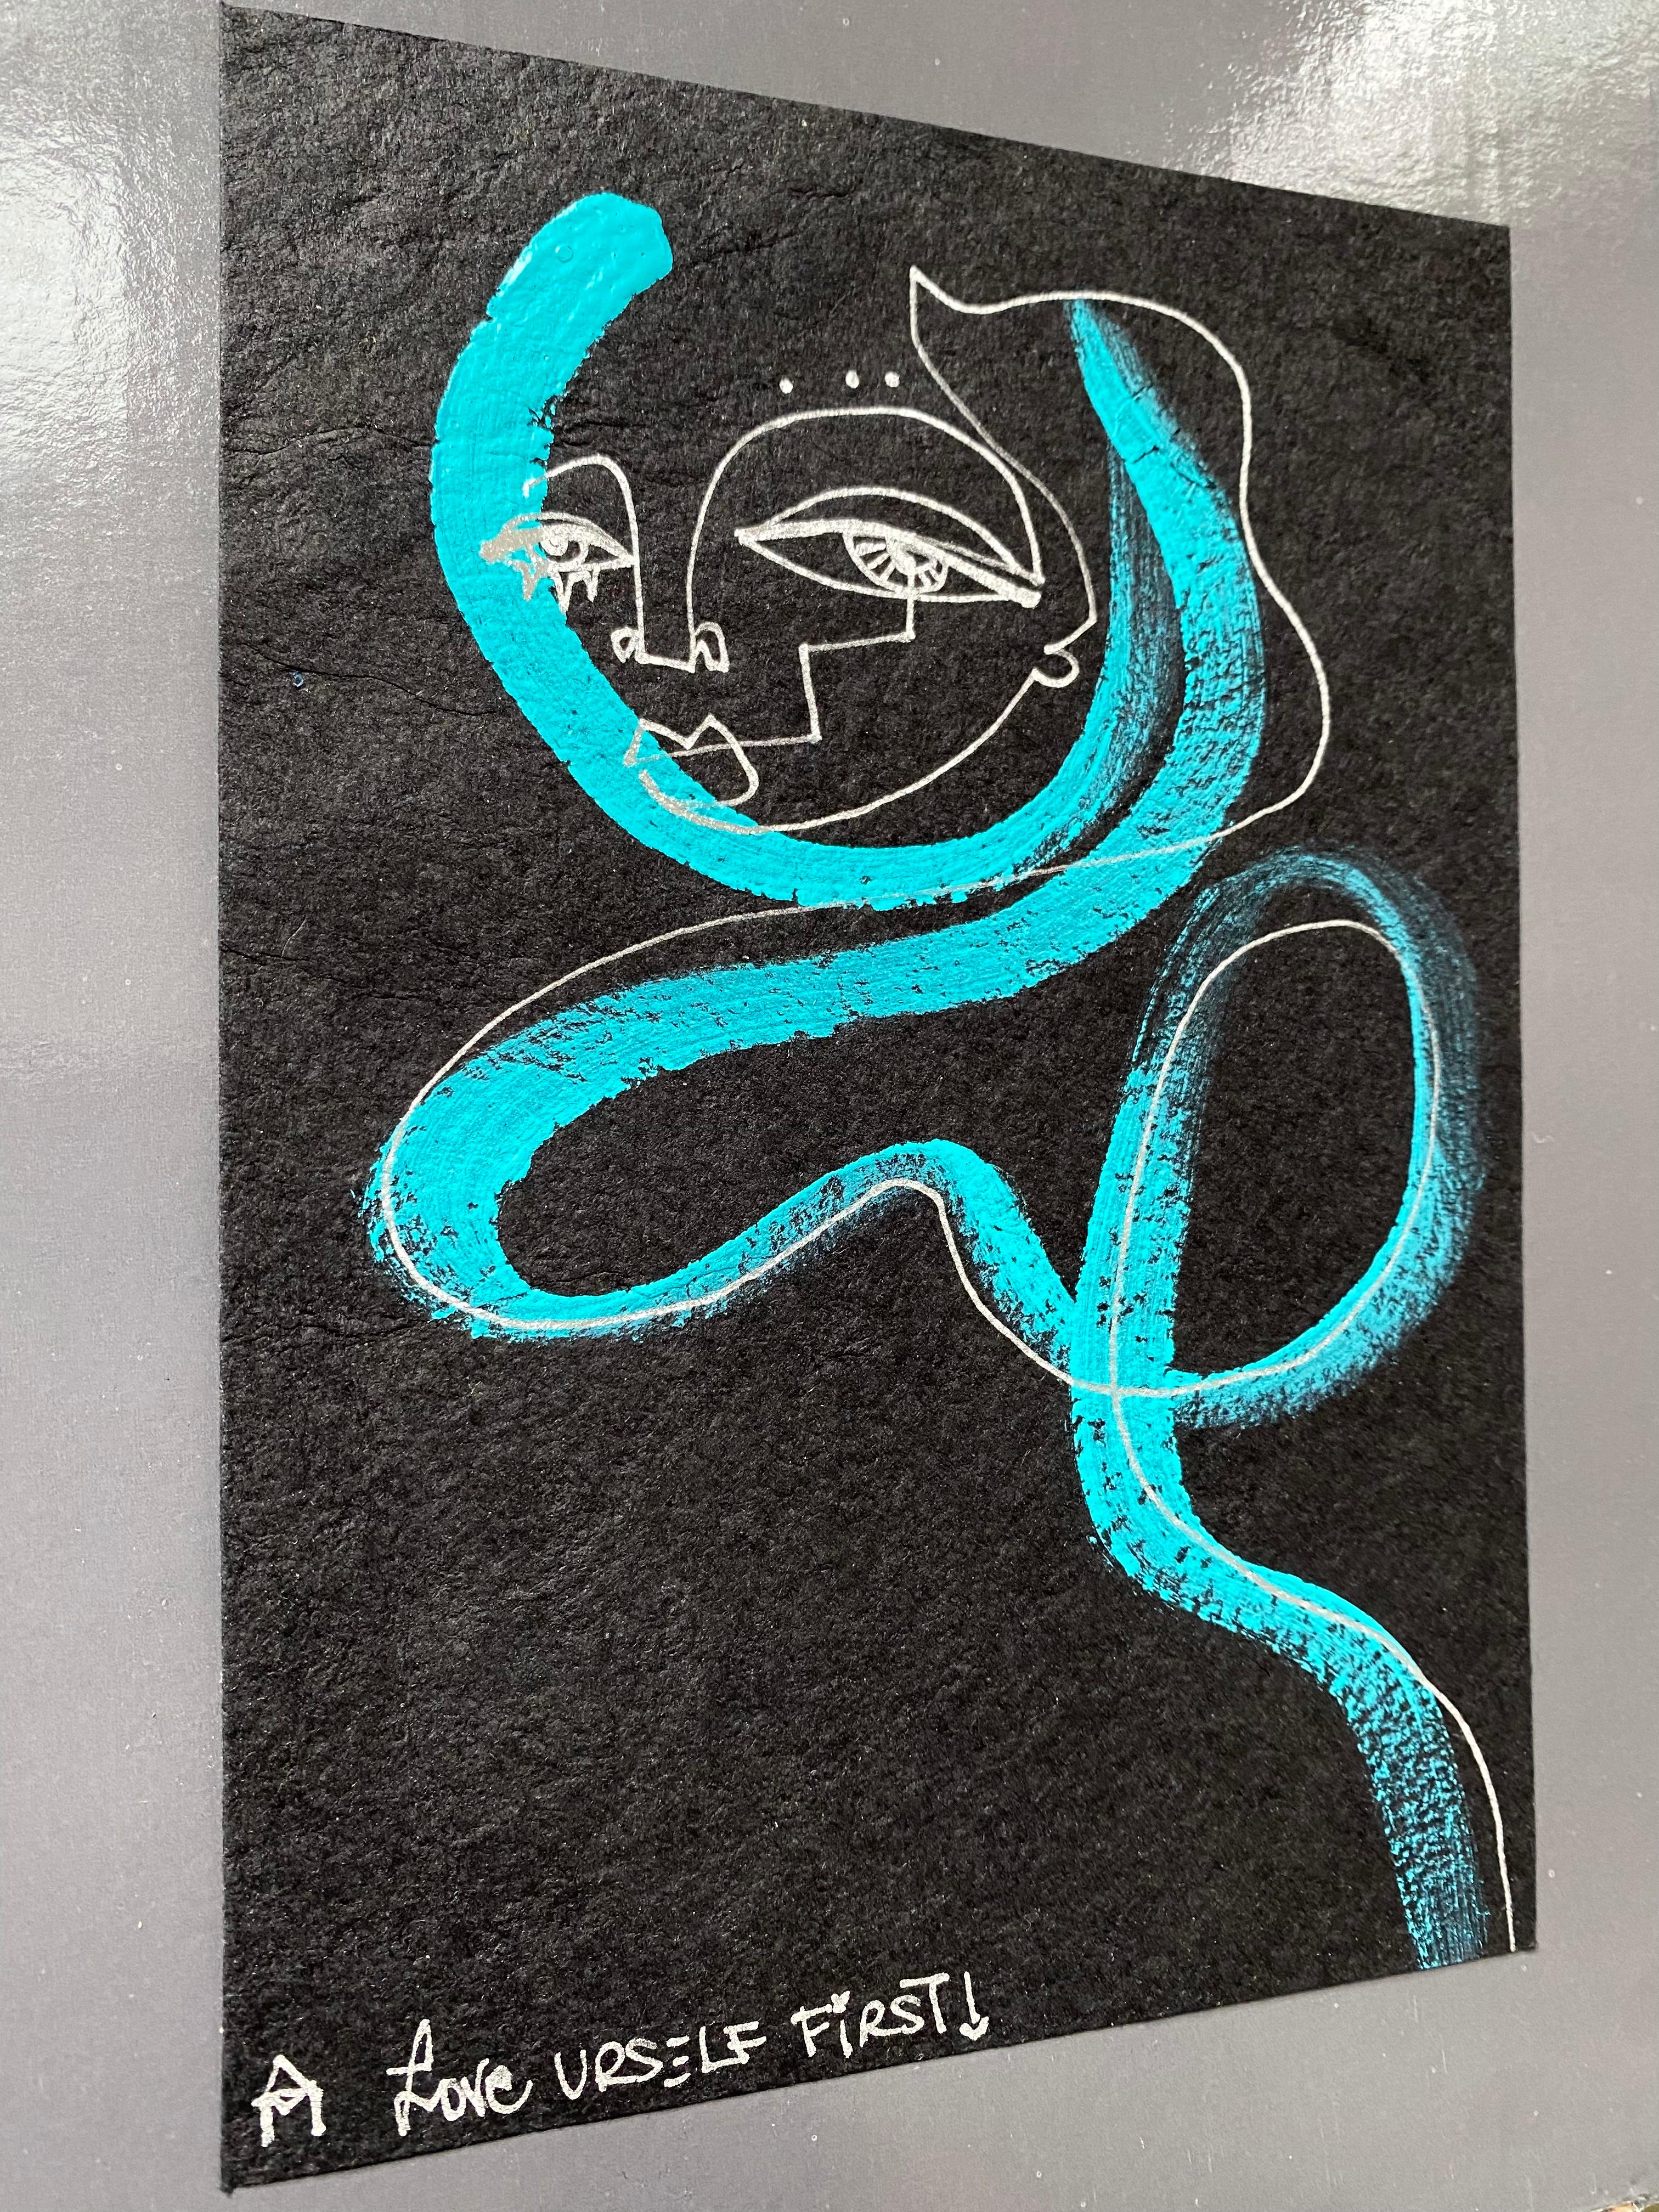 Love Urself First, acrylic & chrome ink on watercolor paper by Alice Mizrachi 
Teal brushstrokes of a figure on black watercolor paper with chrome line work.  Original one of a kind piece Signed by artist.

ARTIST BIO 
Alice Mizrachi is a New York